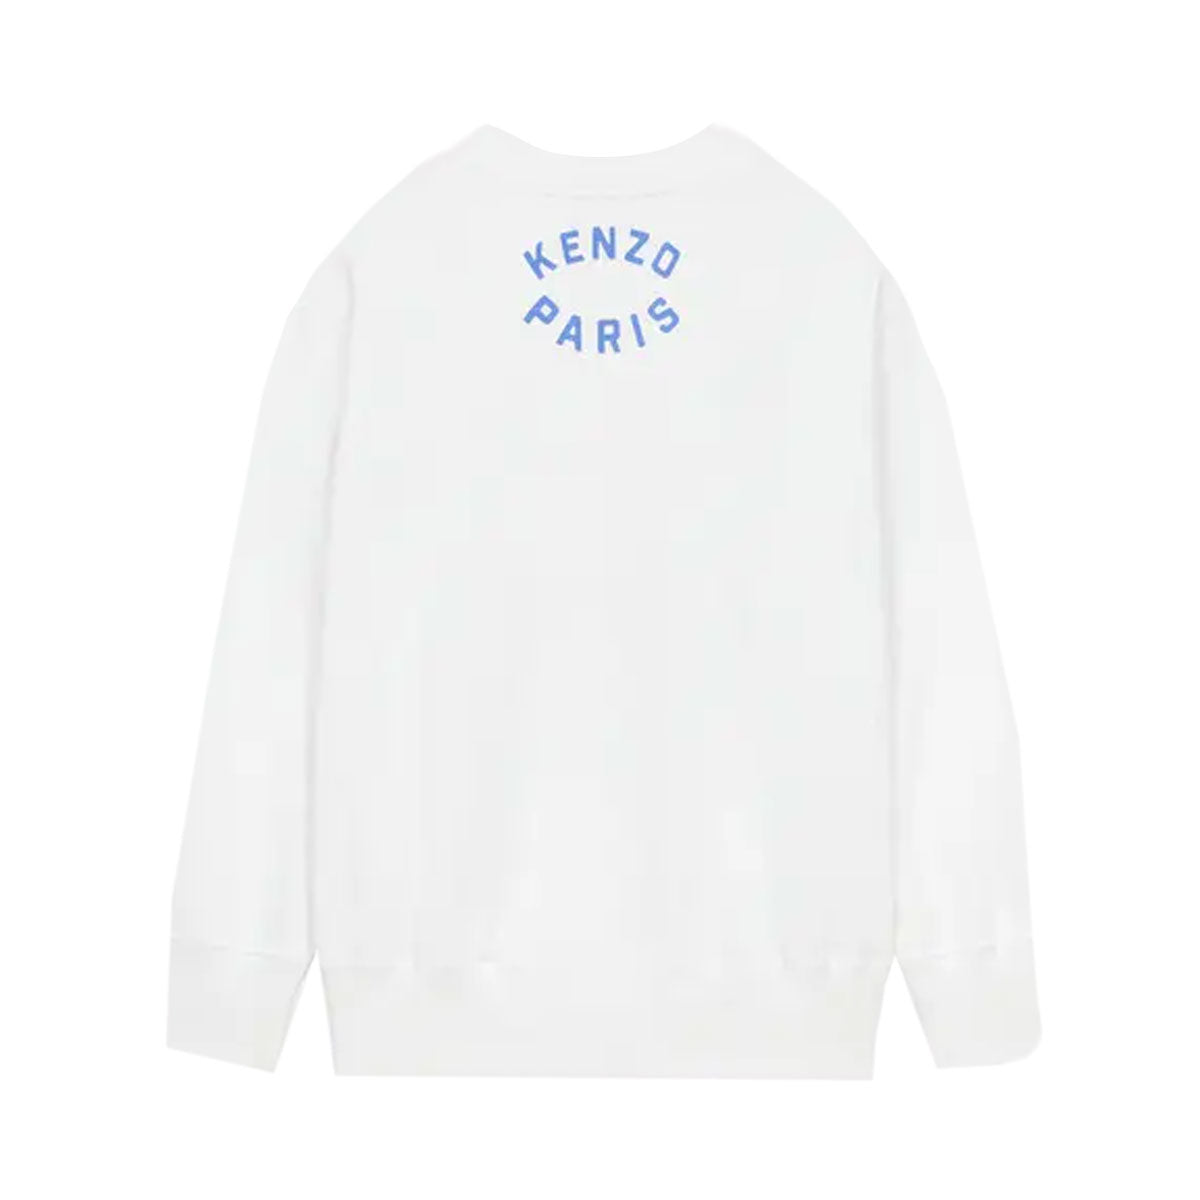 KENZO TARGET' オーバーサイズ スウェット | Why are you here?